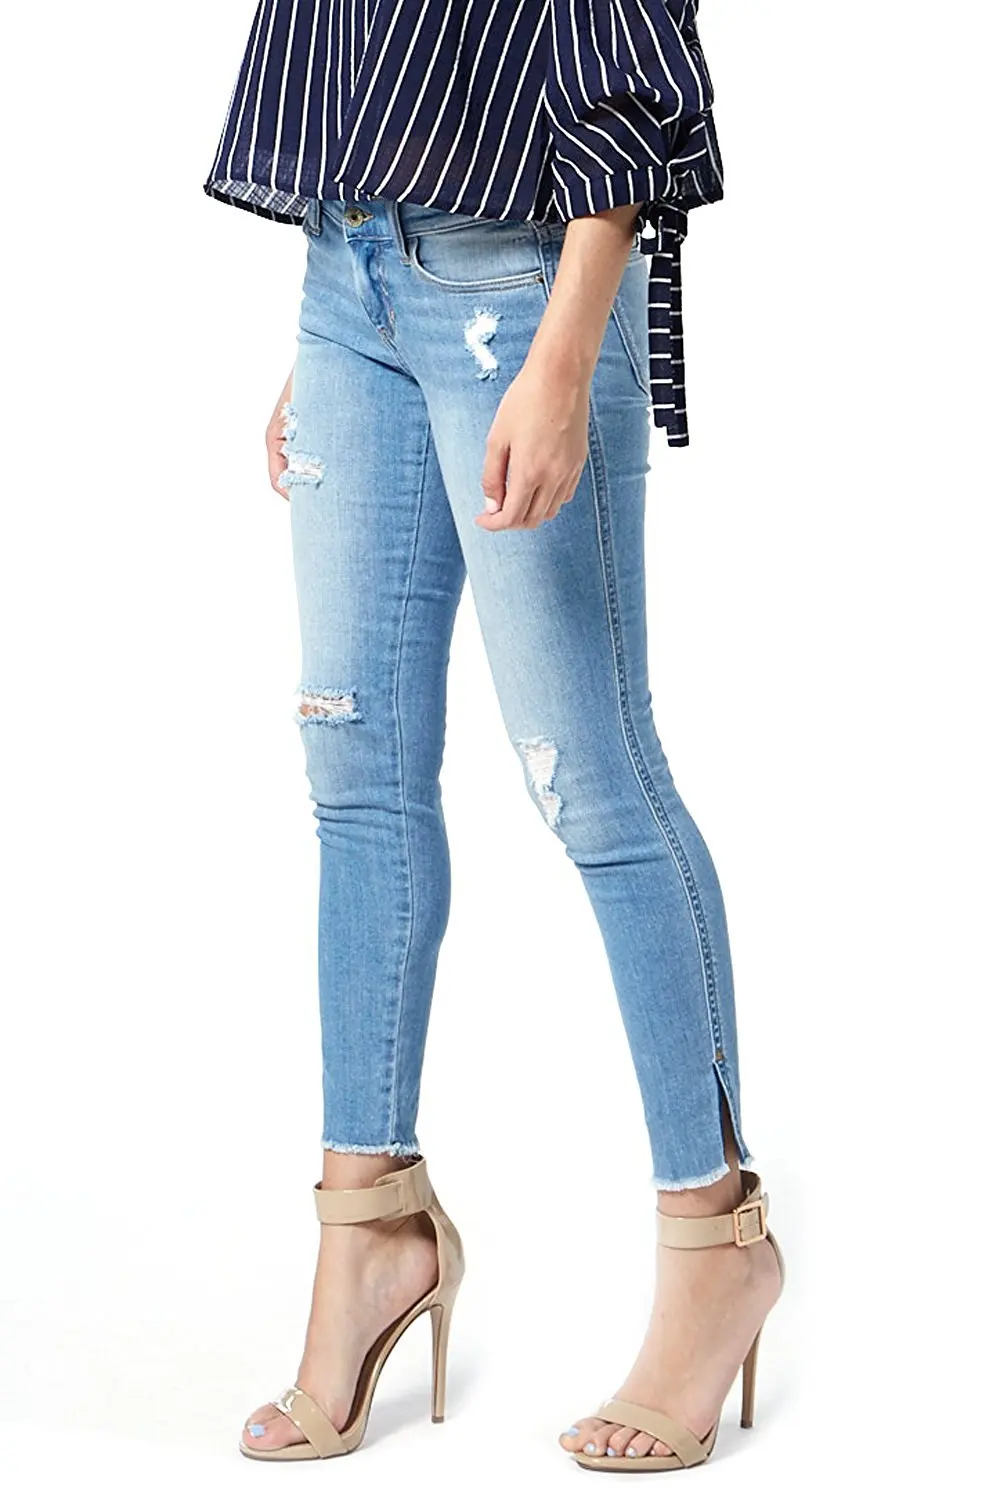 Cheap Tight Low Rise Jeans, find Tight Low Rise Jeans deals on line at ...